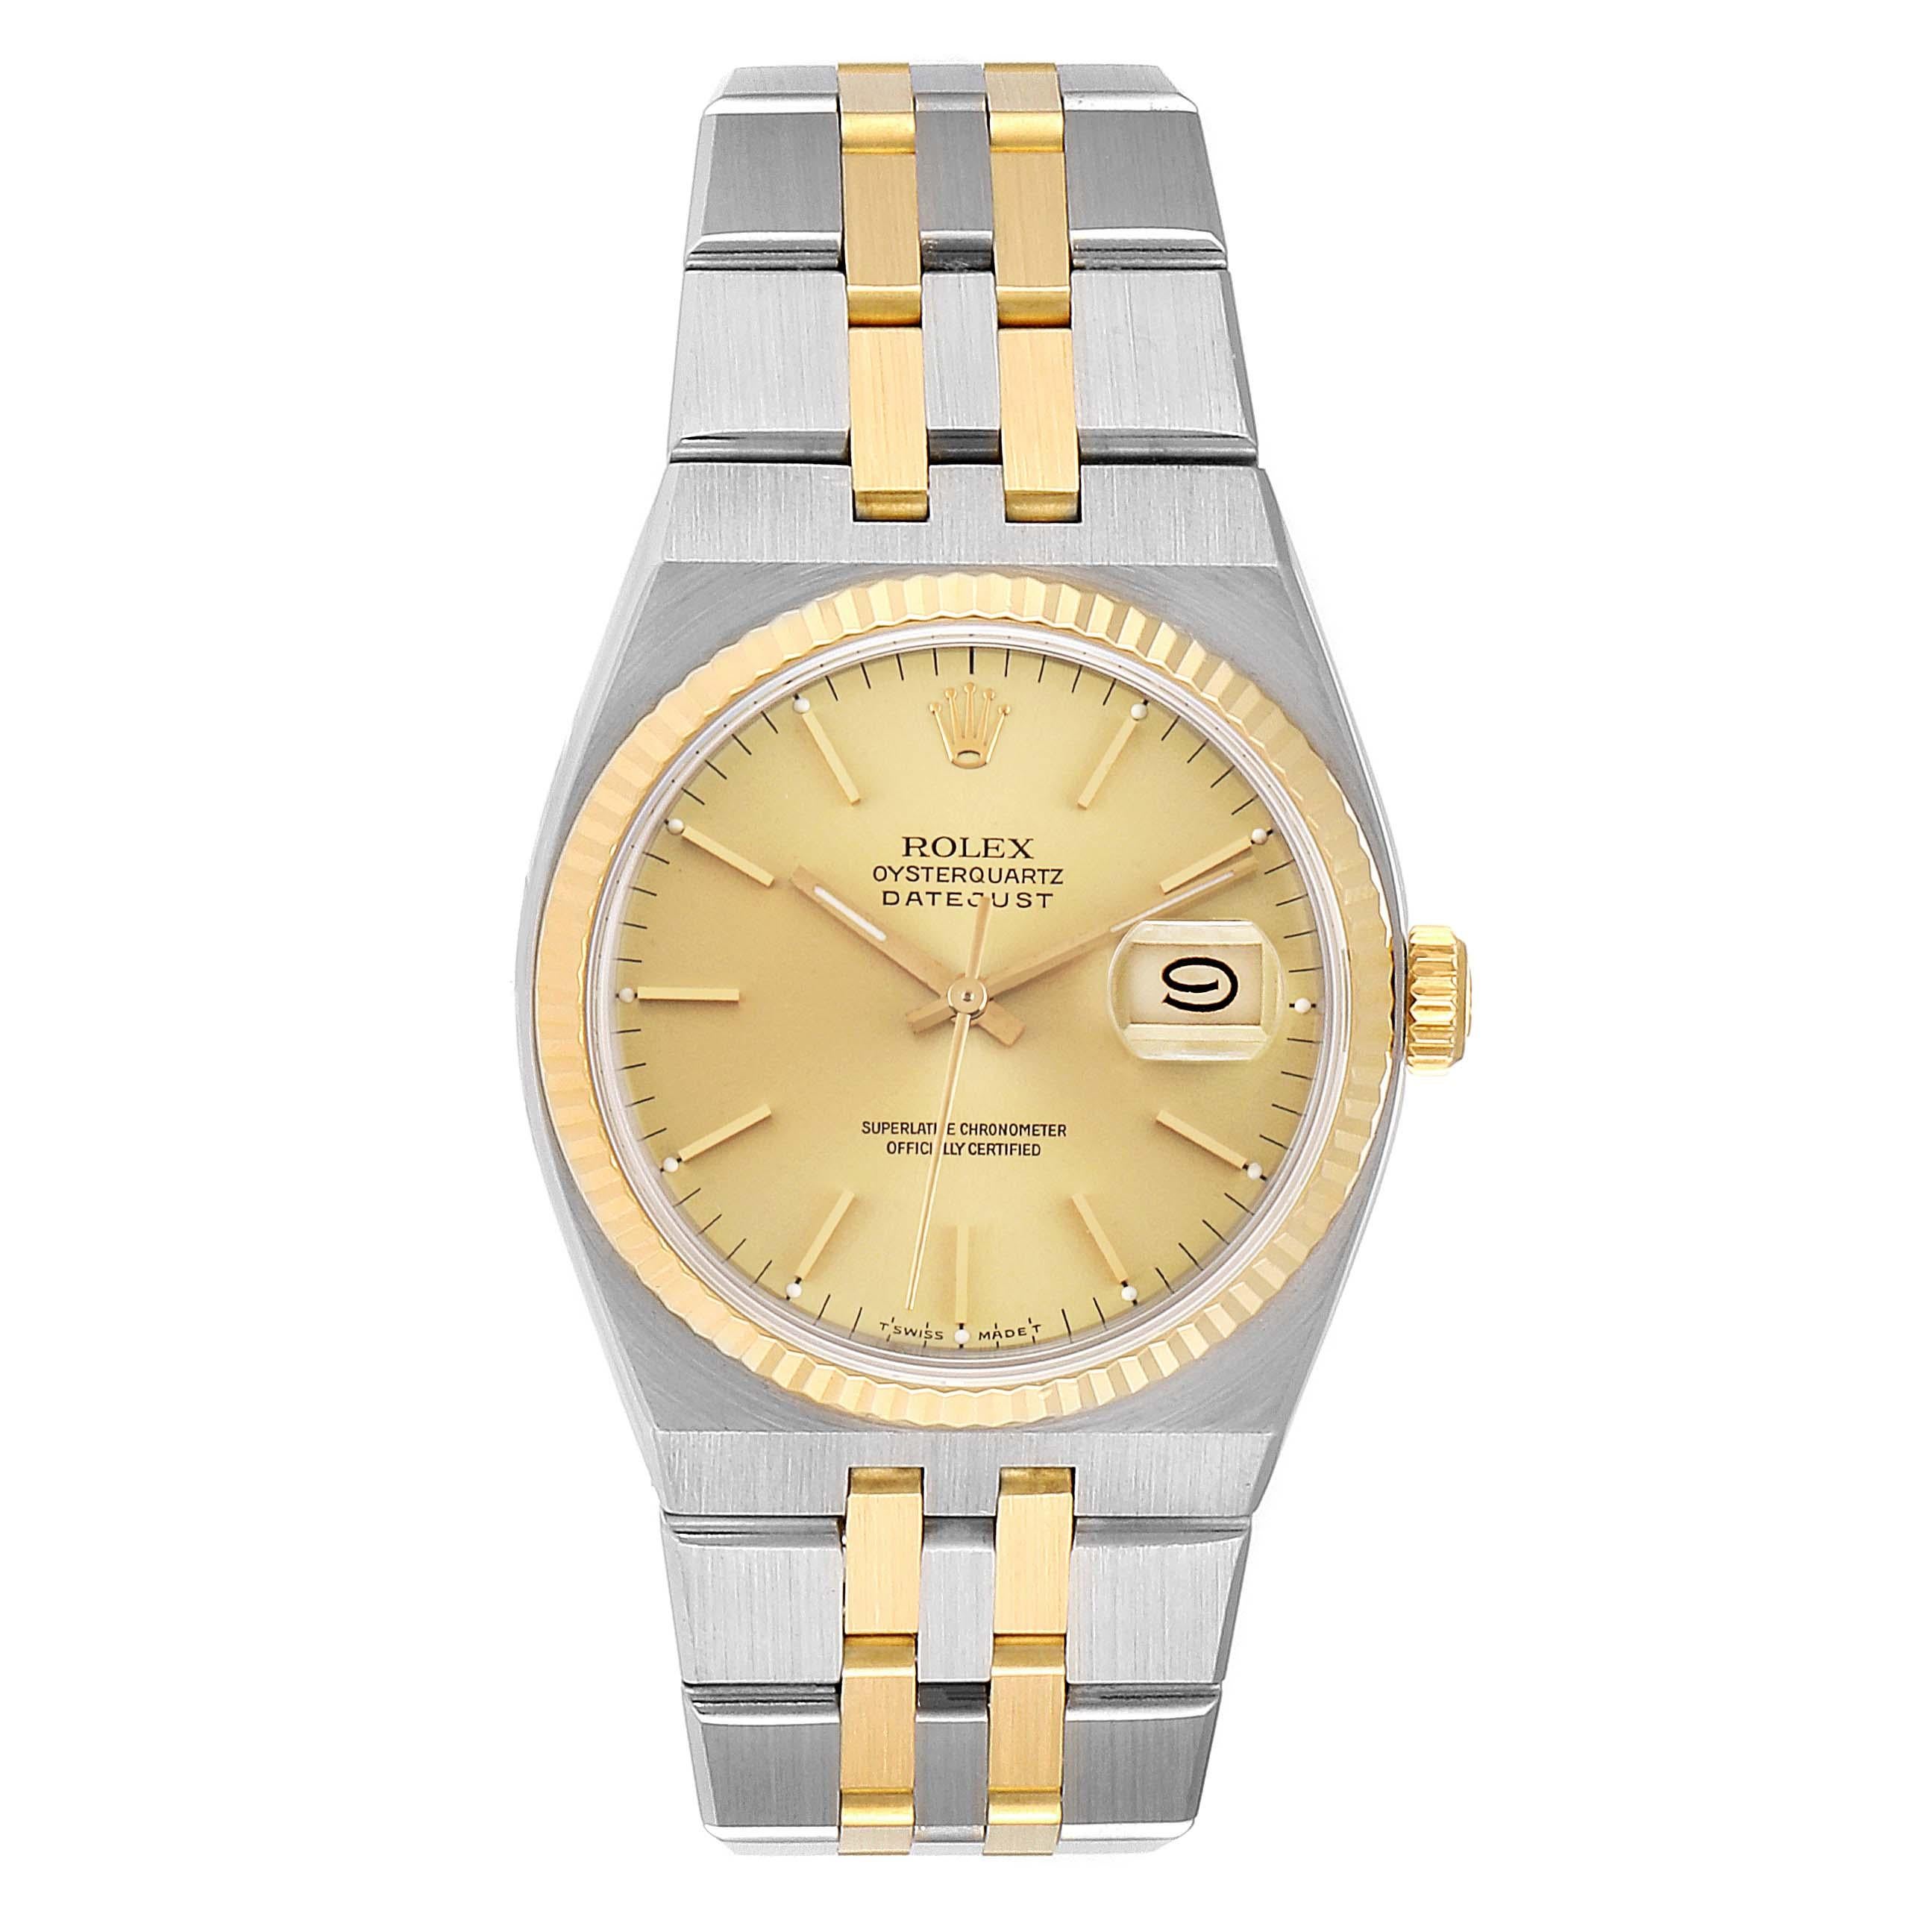 Rolex Oysterquartz Datejust Steel Yellow Gold Mens Watch 17013 Box Papers. Quartz movement. Stainless steel oyster case 36 mm in diameter. Rolex logo on a crown. 18k yellow gold fluted bezel. Scratch resistant sapphire crystal with cyclops